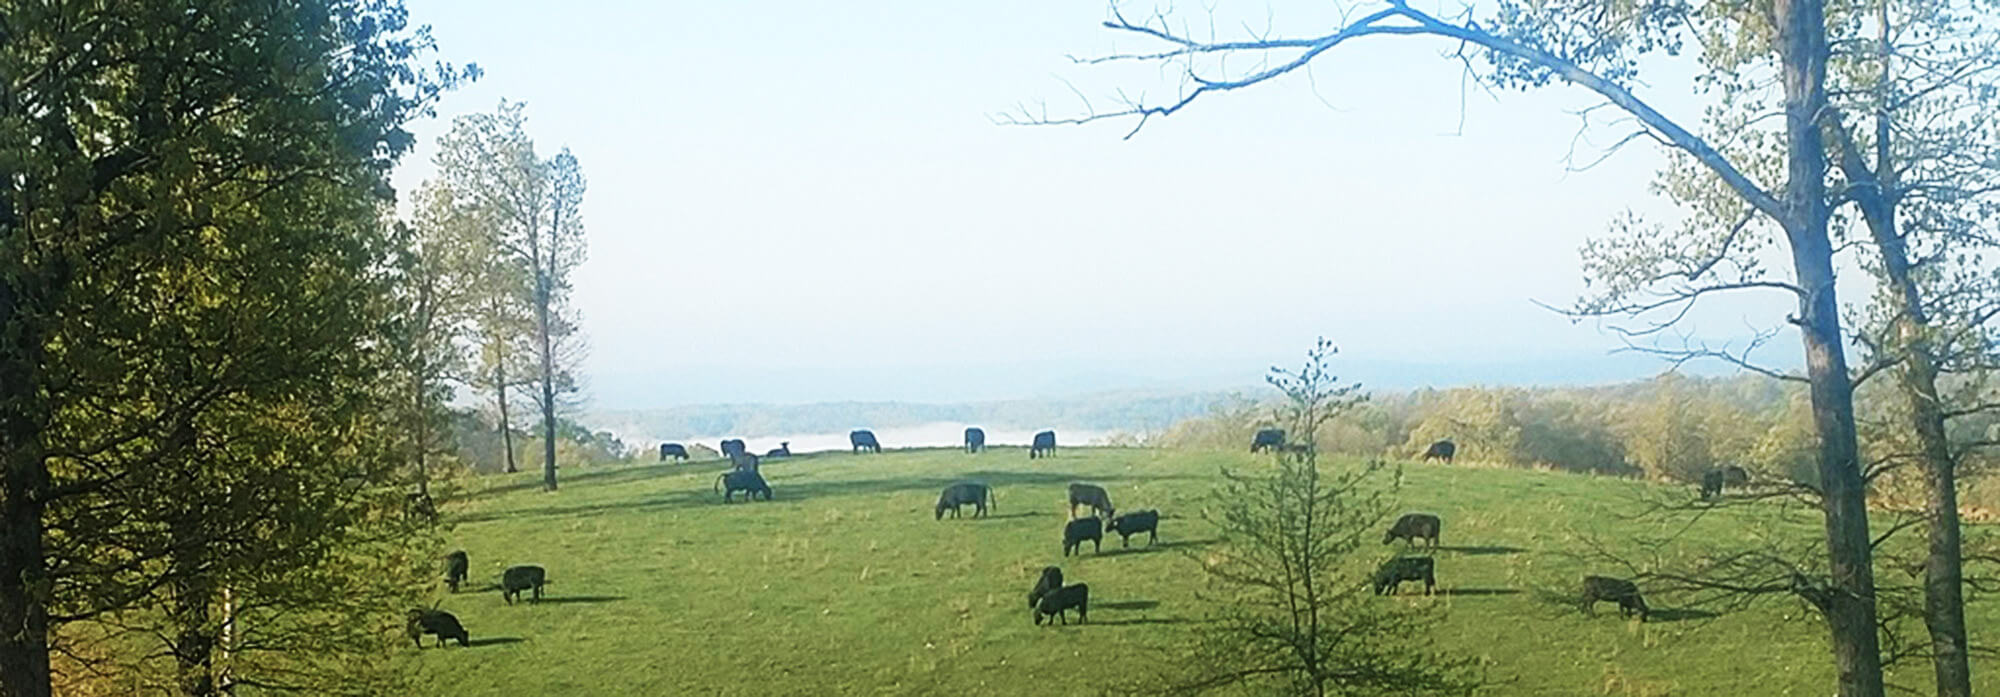 Cows grazing in a pasture